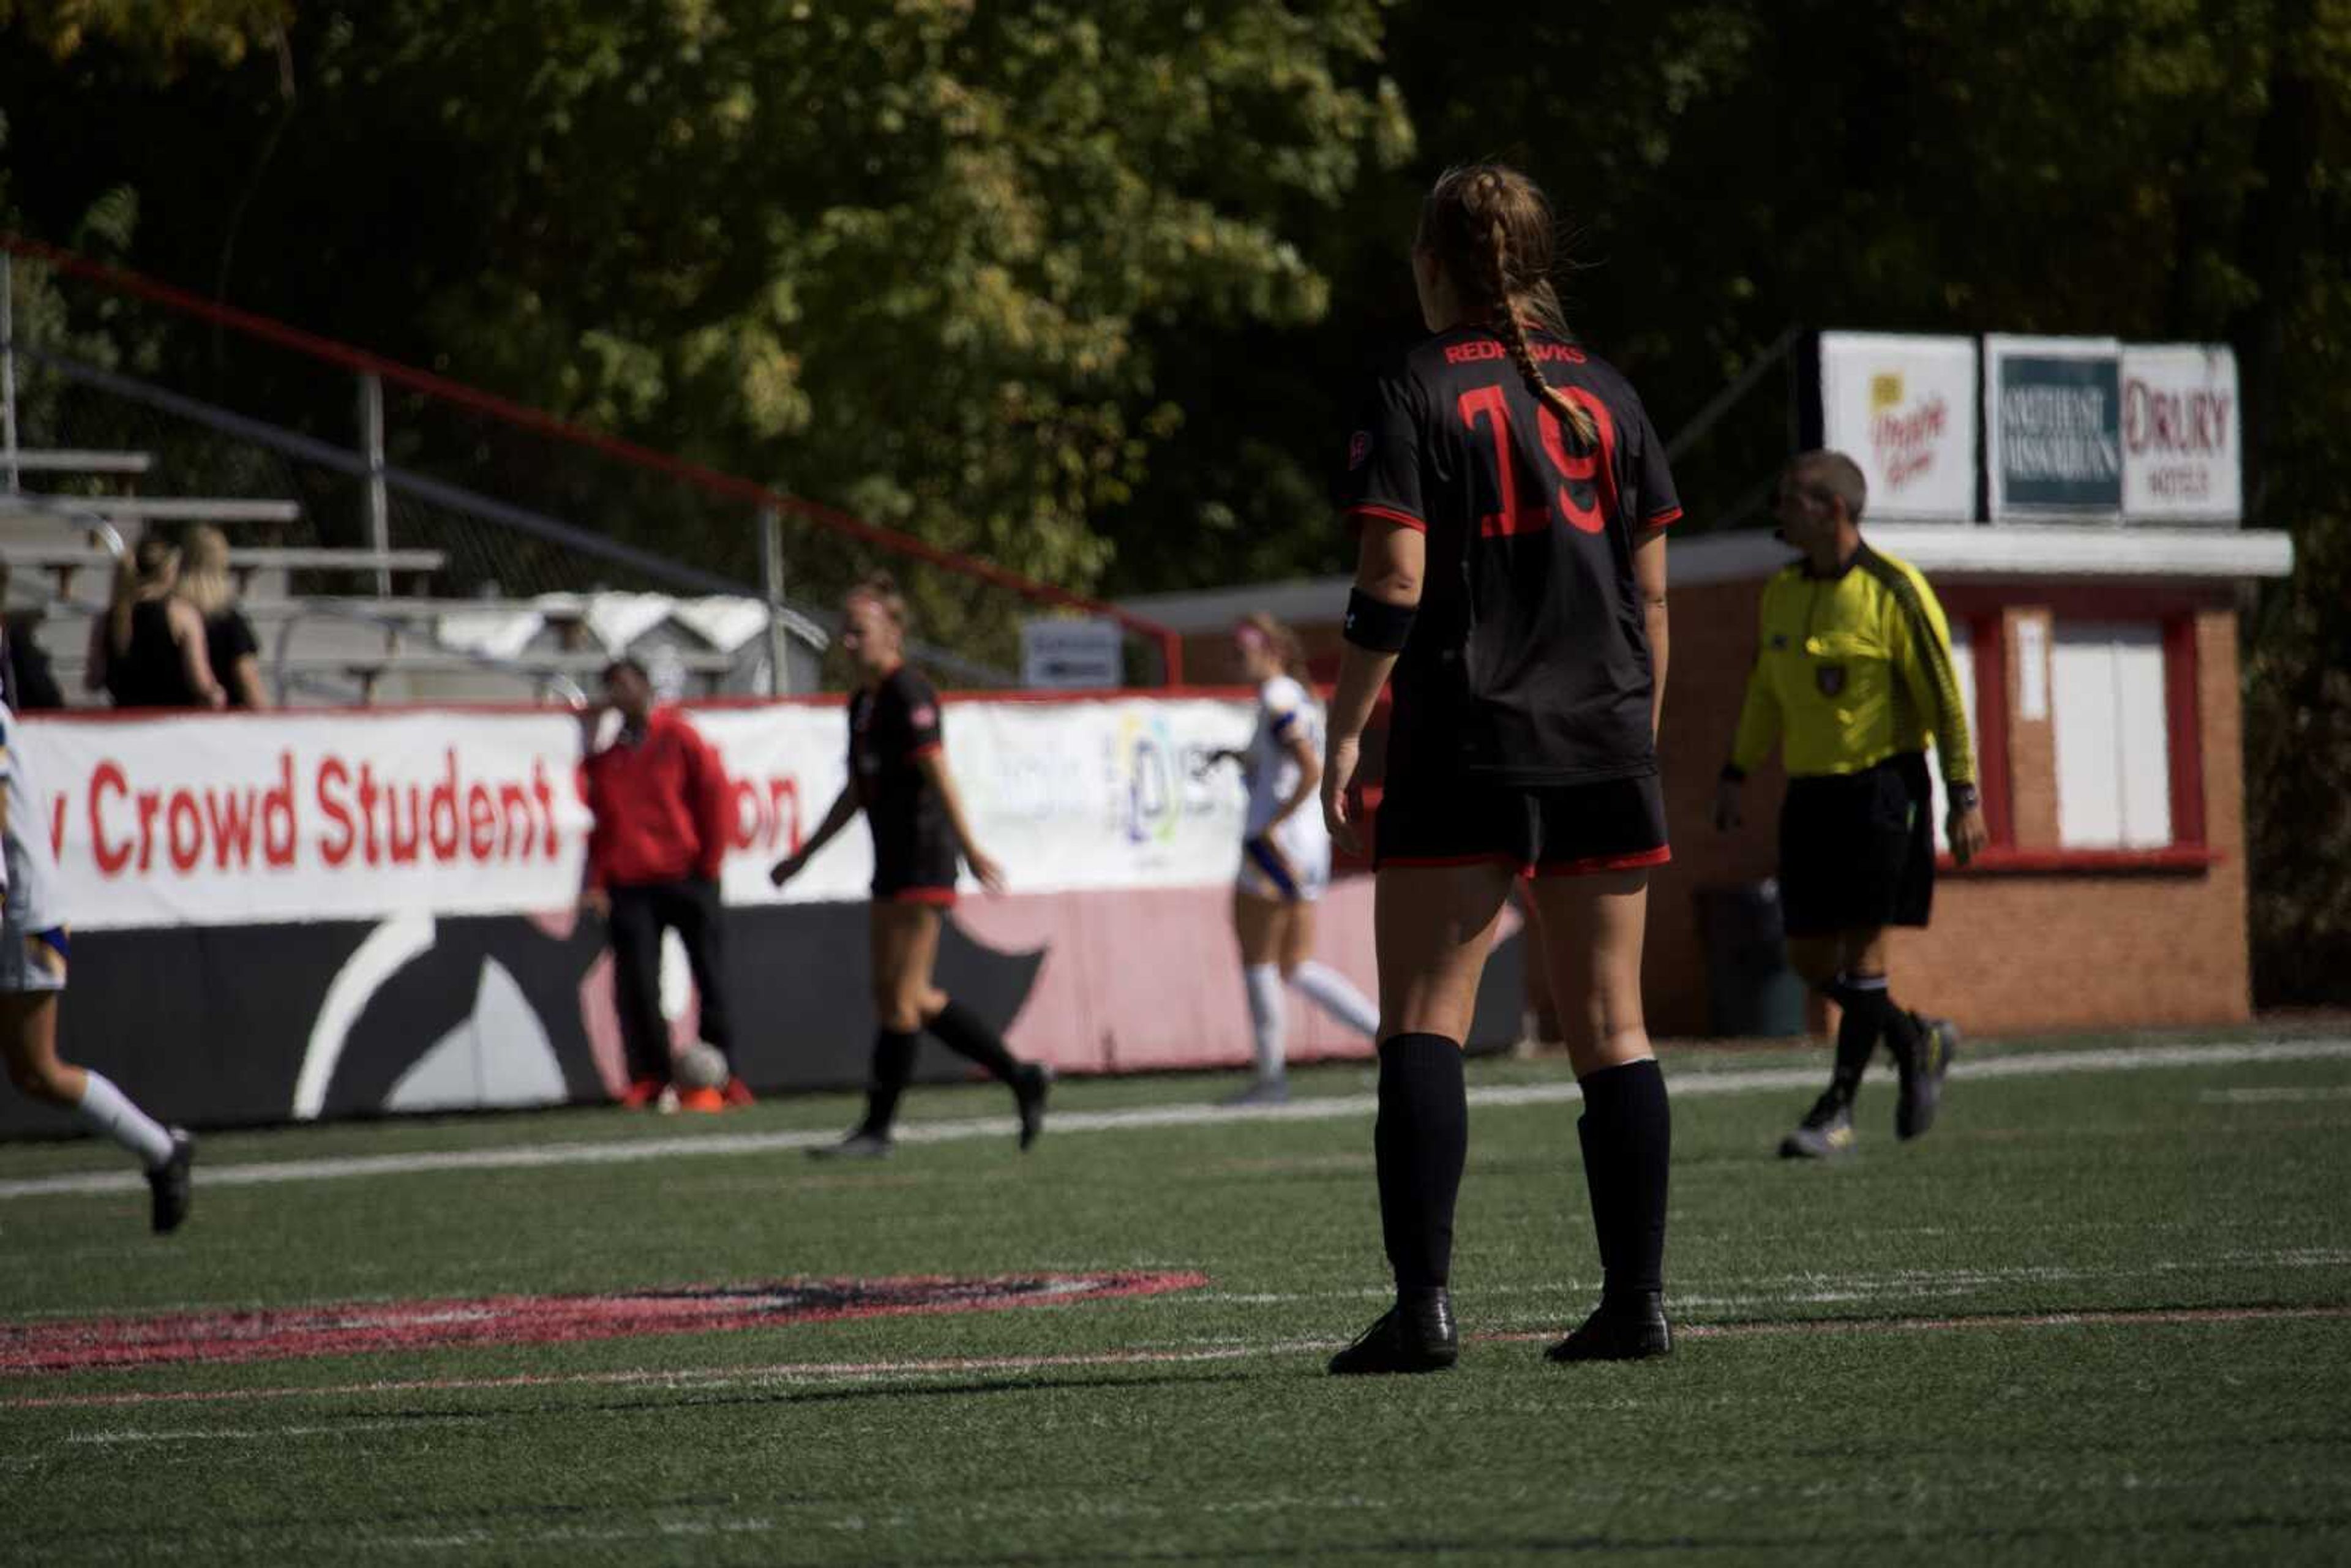 SEMO junior defender/midfielder Maddie Paulson (19) looks on at her teammates during Sunday's game against Morehead State University.